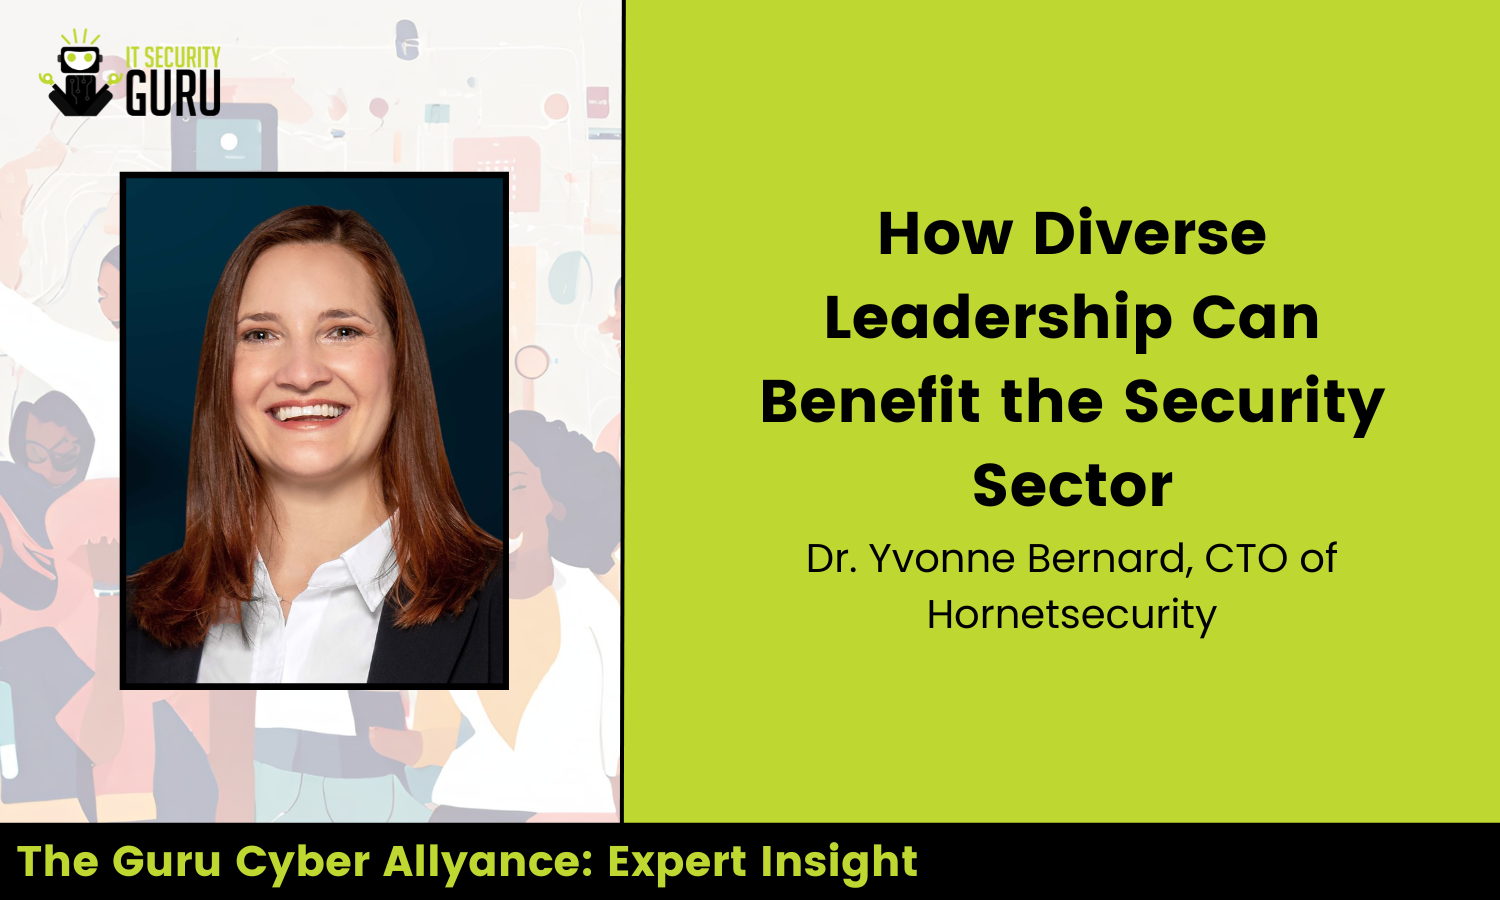 Expert Insight: How Diverse Leadership Can Benefit the Security Sector